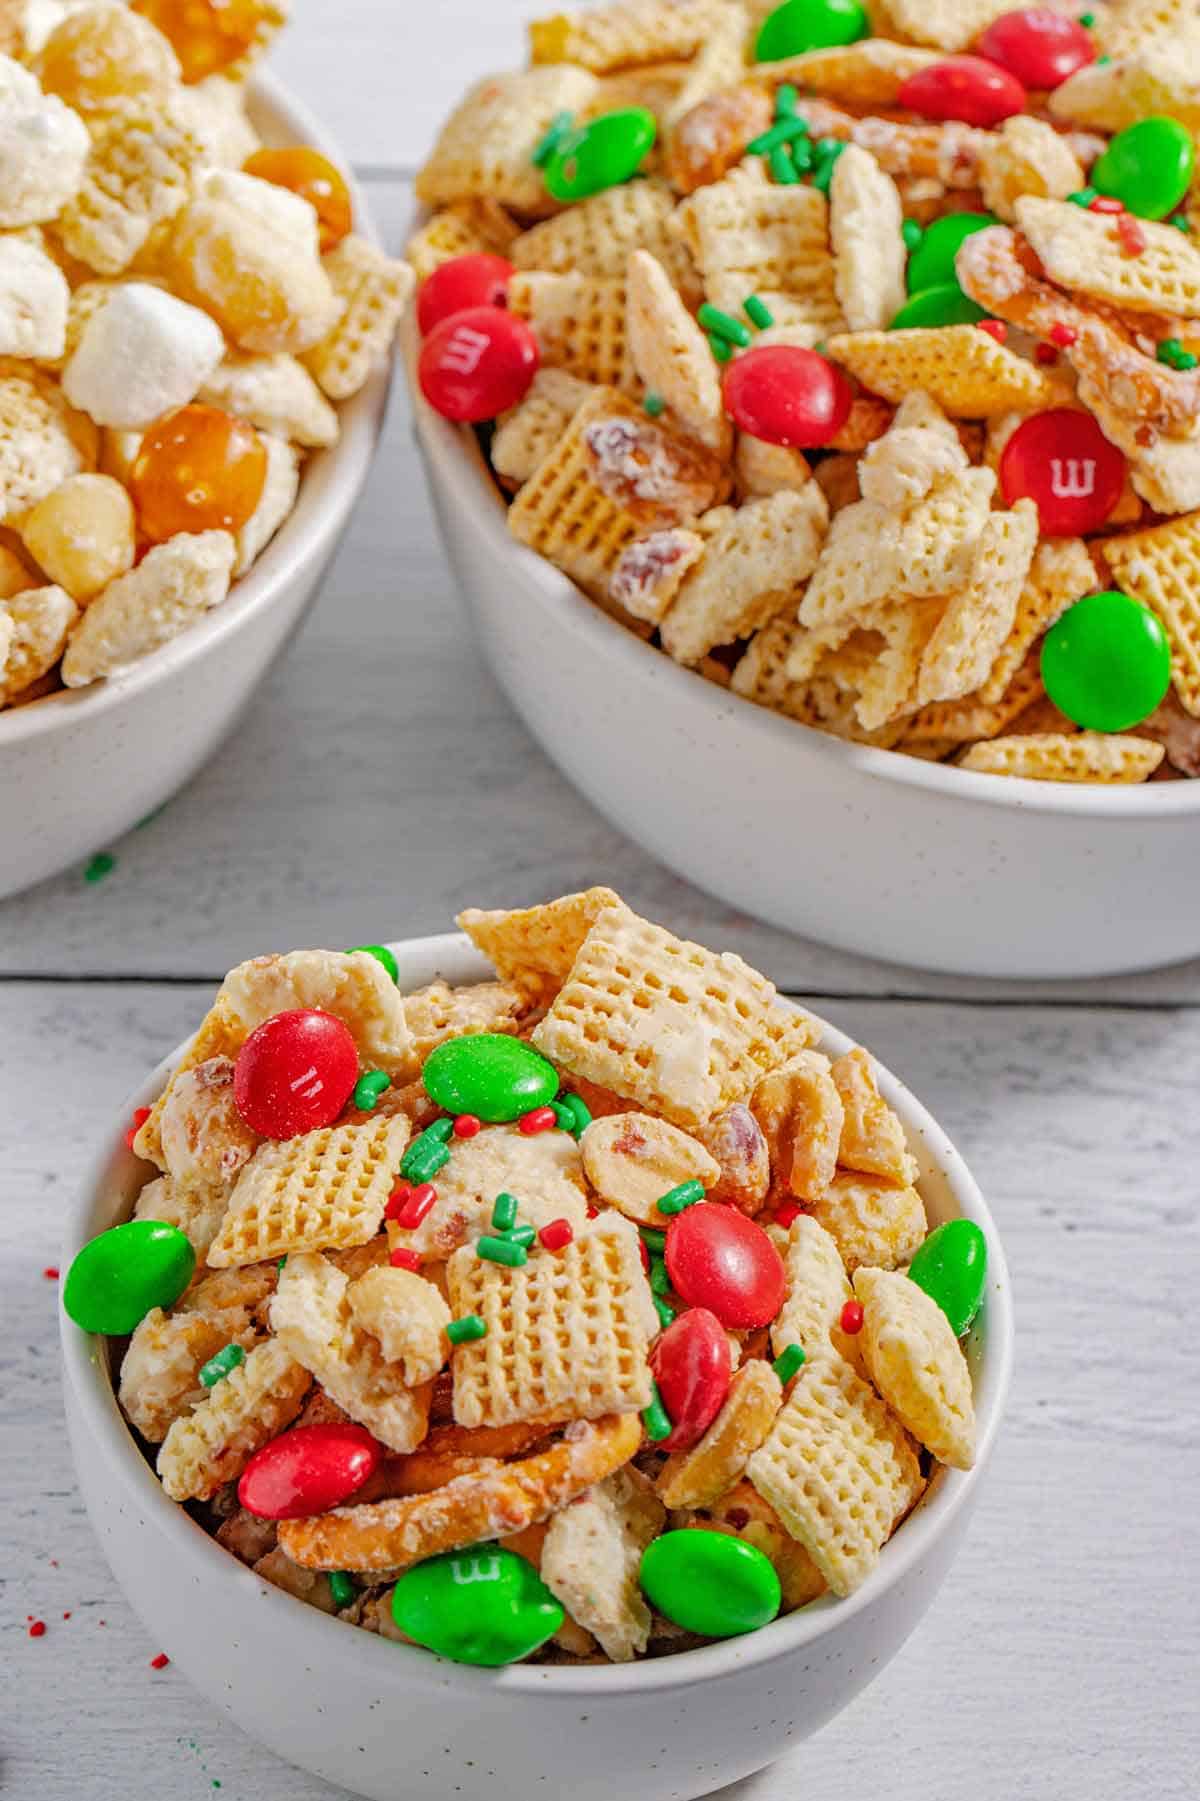 Bowl of Christmas Chex mix with larger serving bowls behind it.